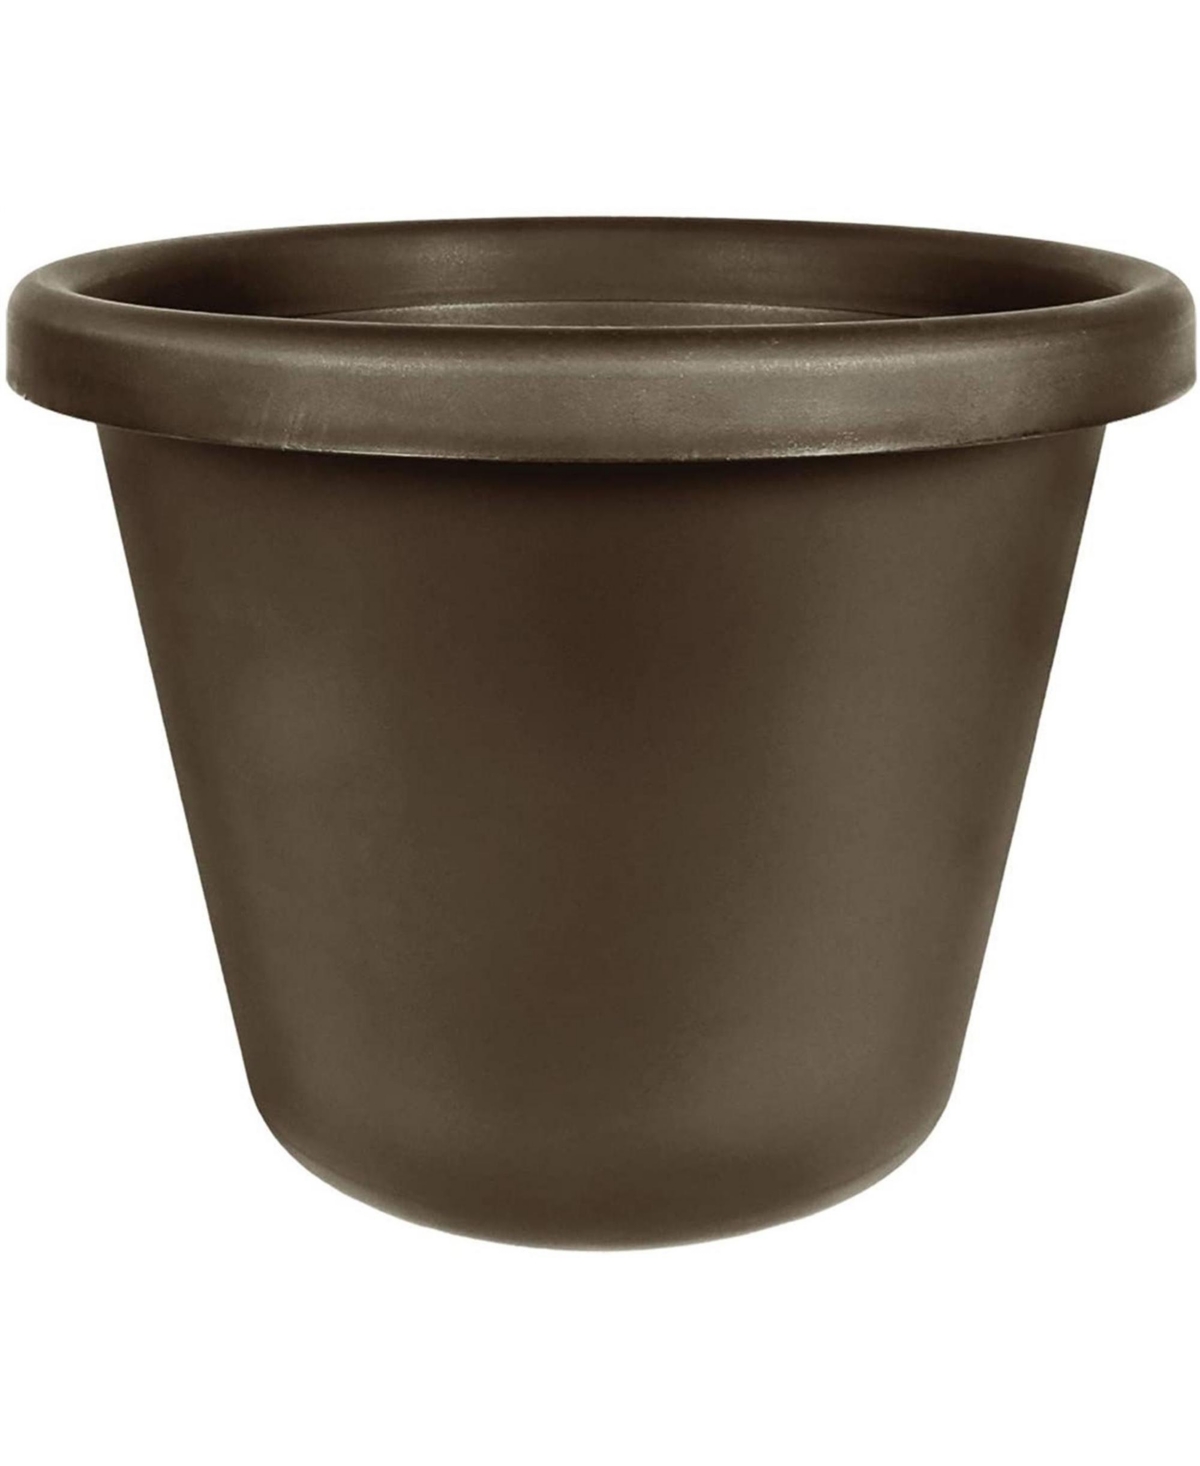 Classic Pot - Chocolate - 7in - Brown